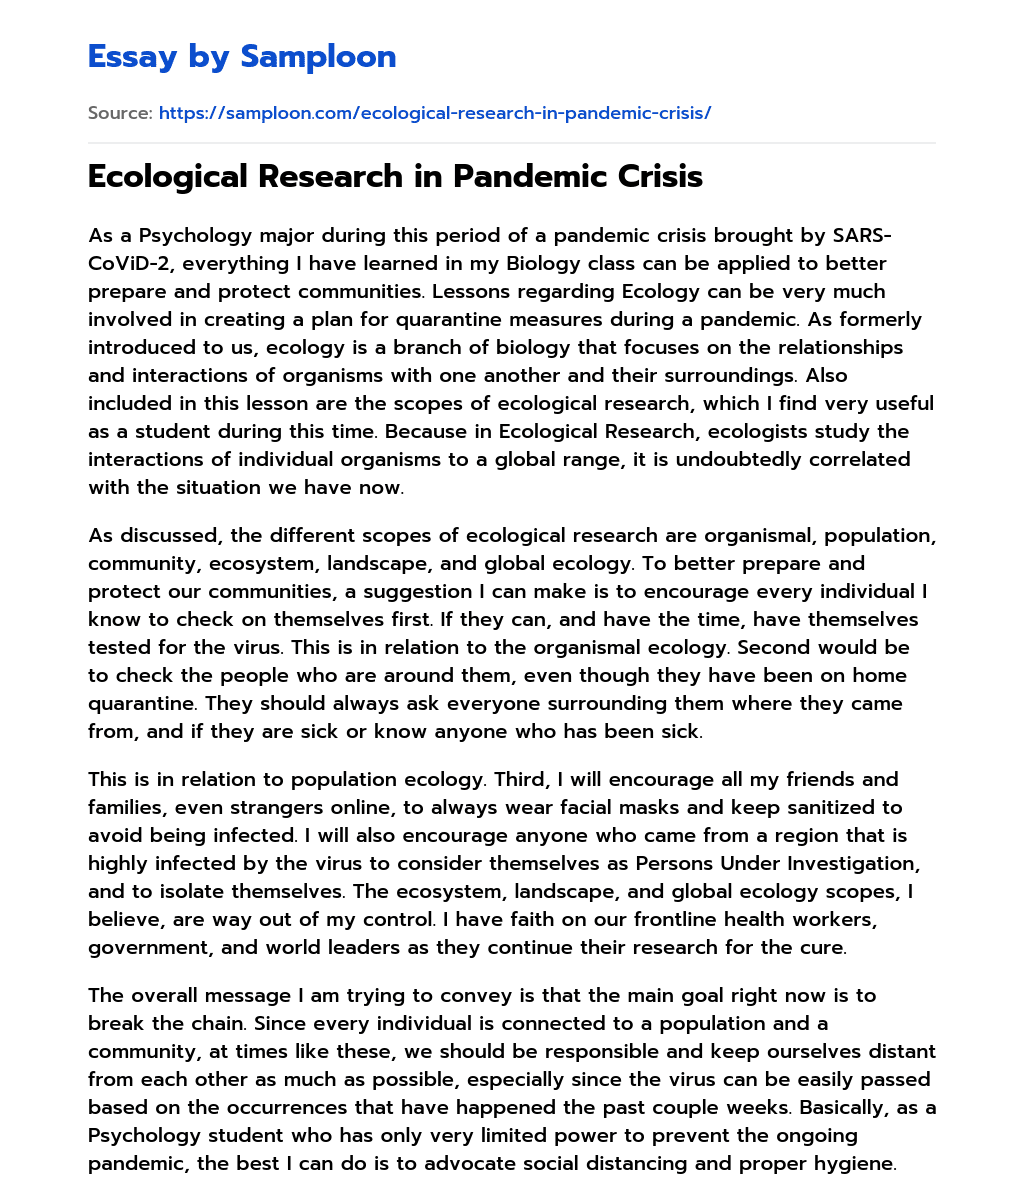 Ecological Research in Pandemic Crisis essay